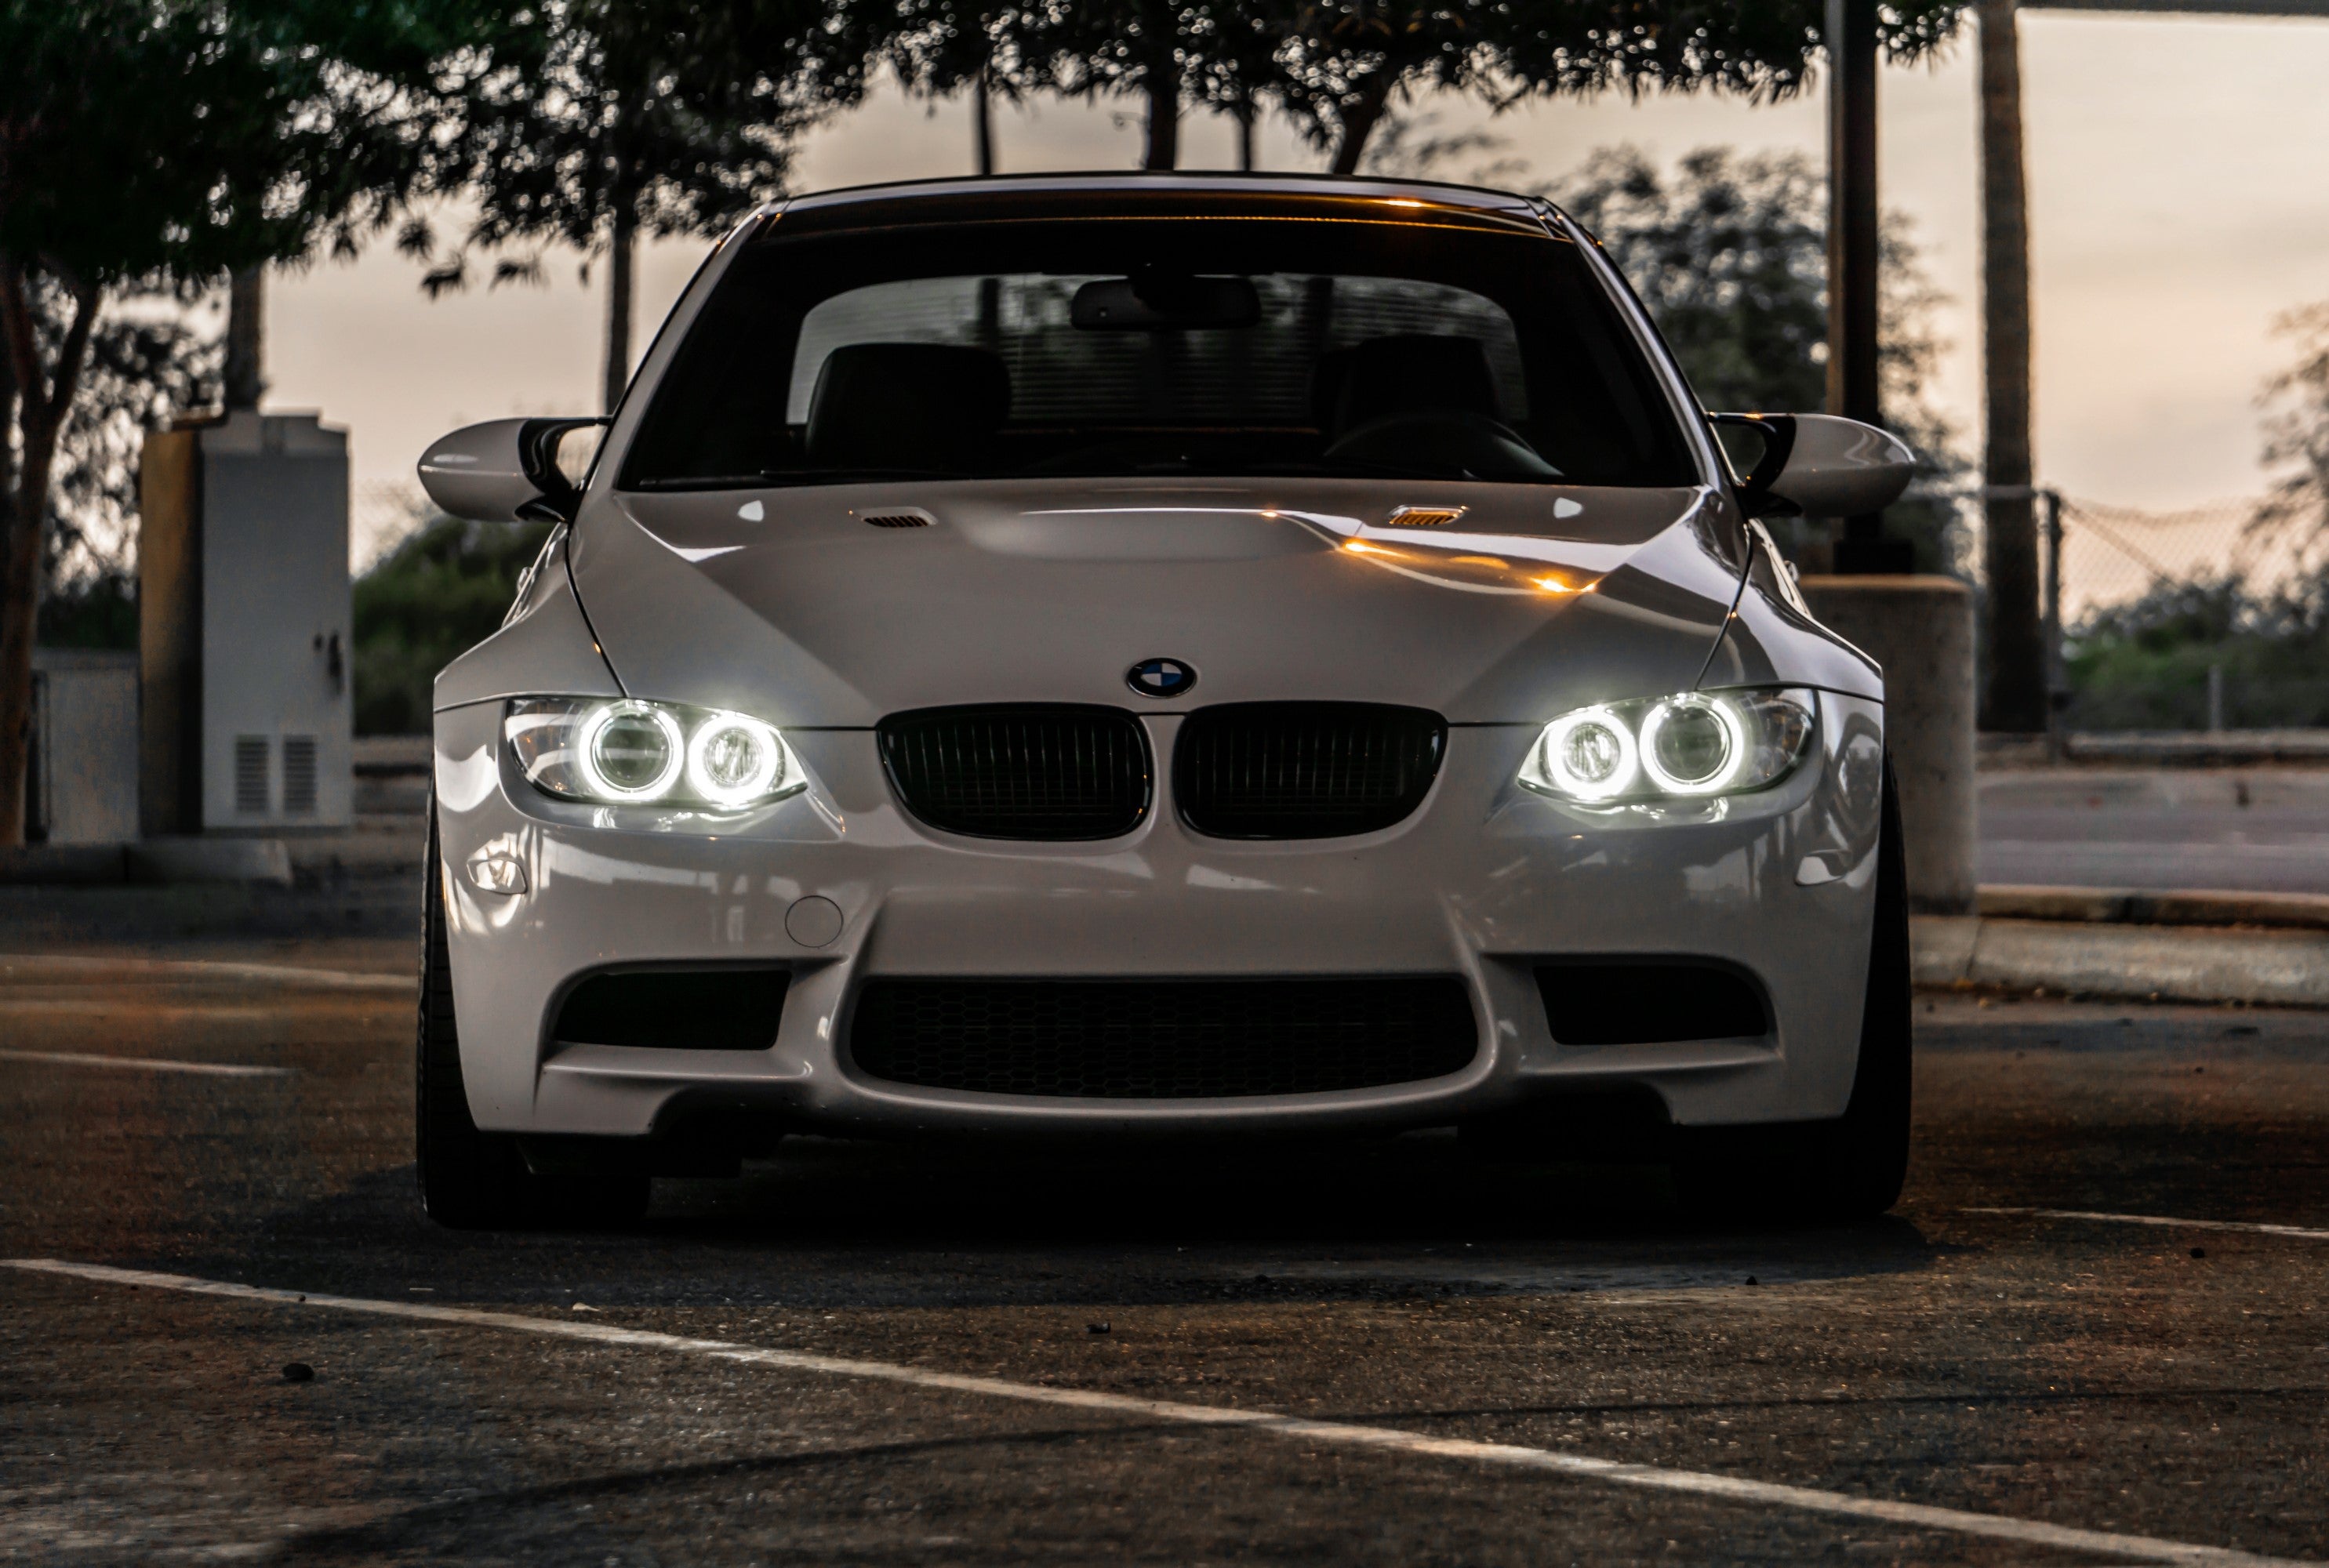 Lux H8 189 for BMW Angel Eyes